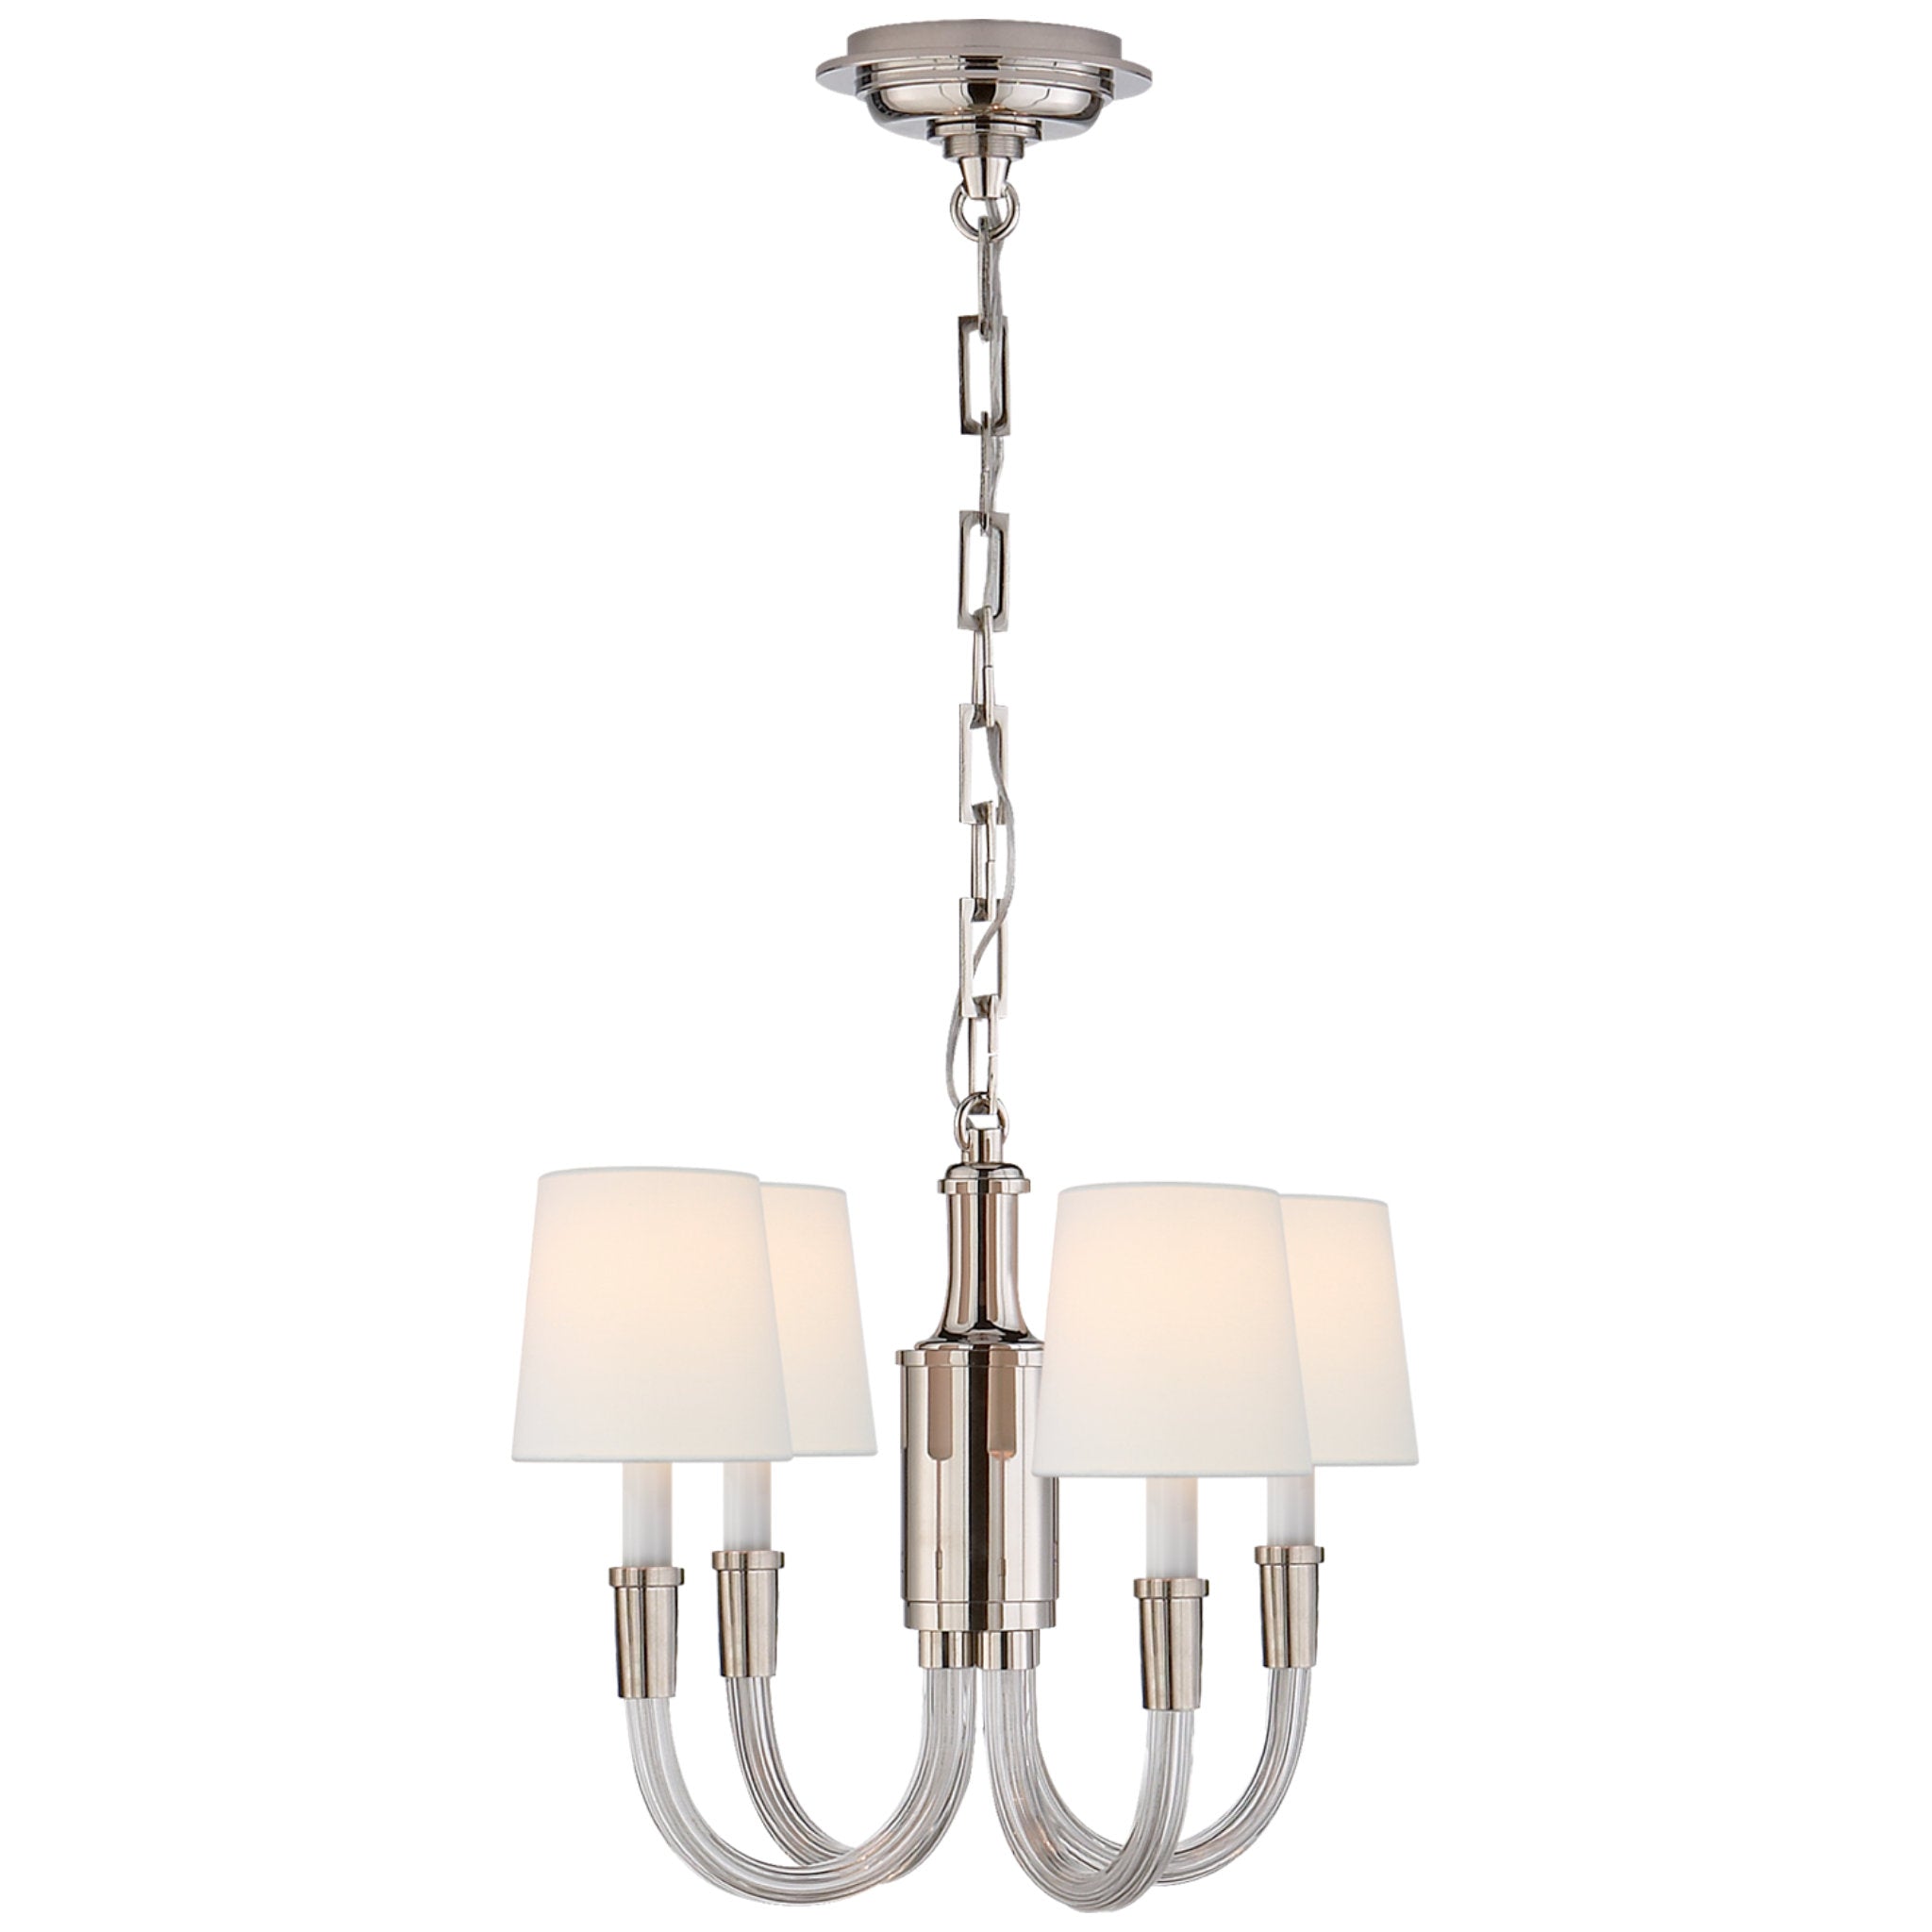 Thomas O'Brien Vivian Mini Chandelier in Polished Nickel with Linen Shades